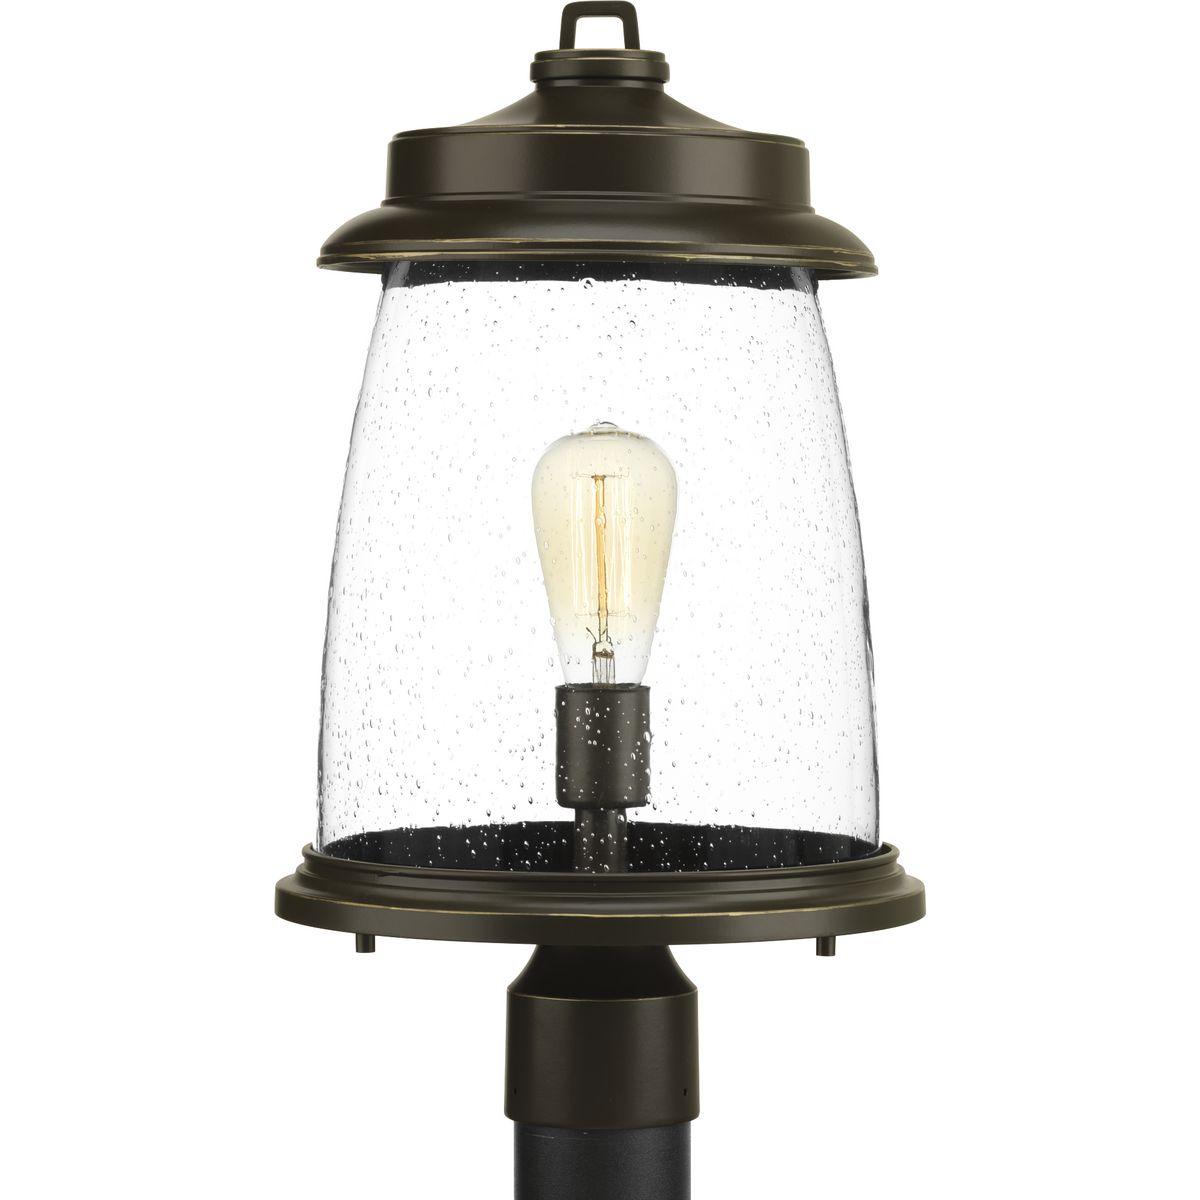 Hubbell P540030-020 Conover is an outdoor lantern collection featuring nautical influences. A protective die cast ring surrounds beautiful clear seeded glass. Vintage metallic finishes are available for this collection that is sure to enhance curb appeal for a variety of ext